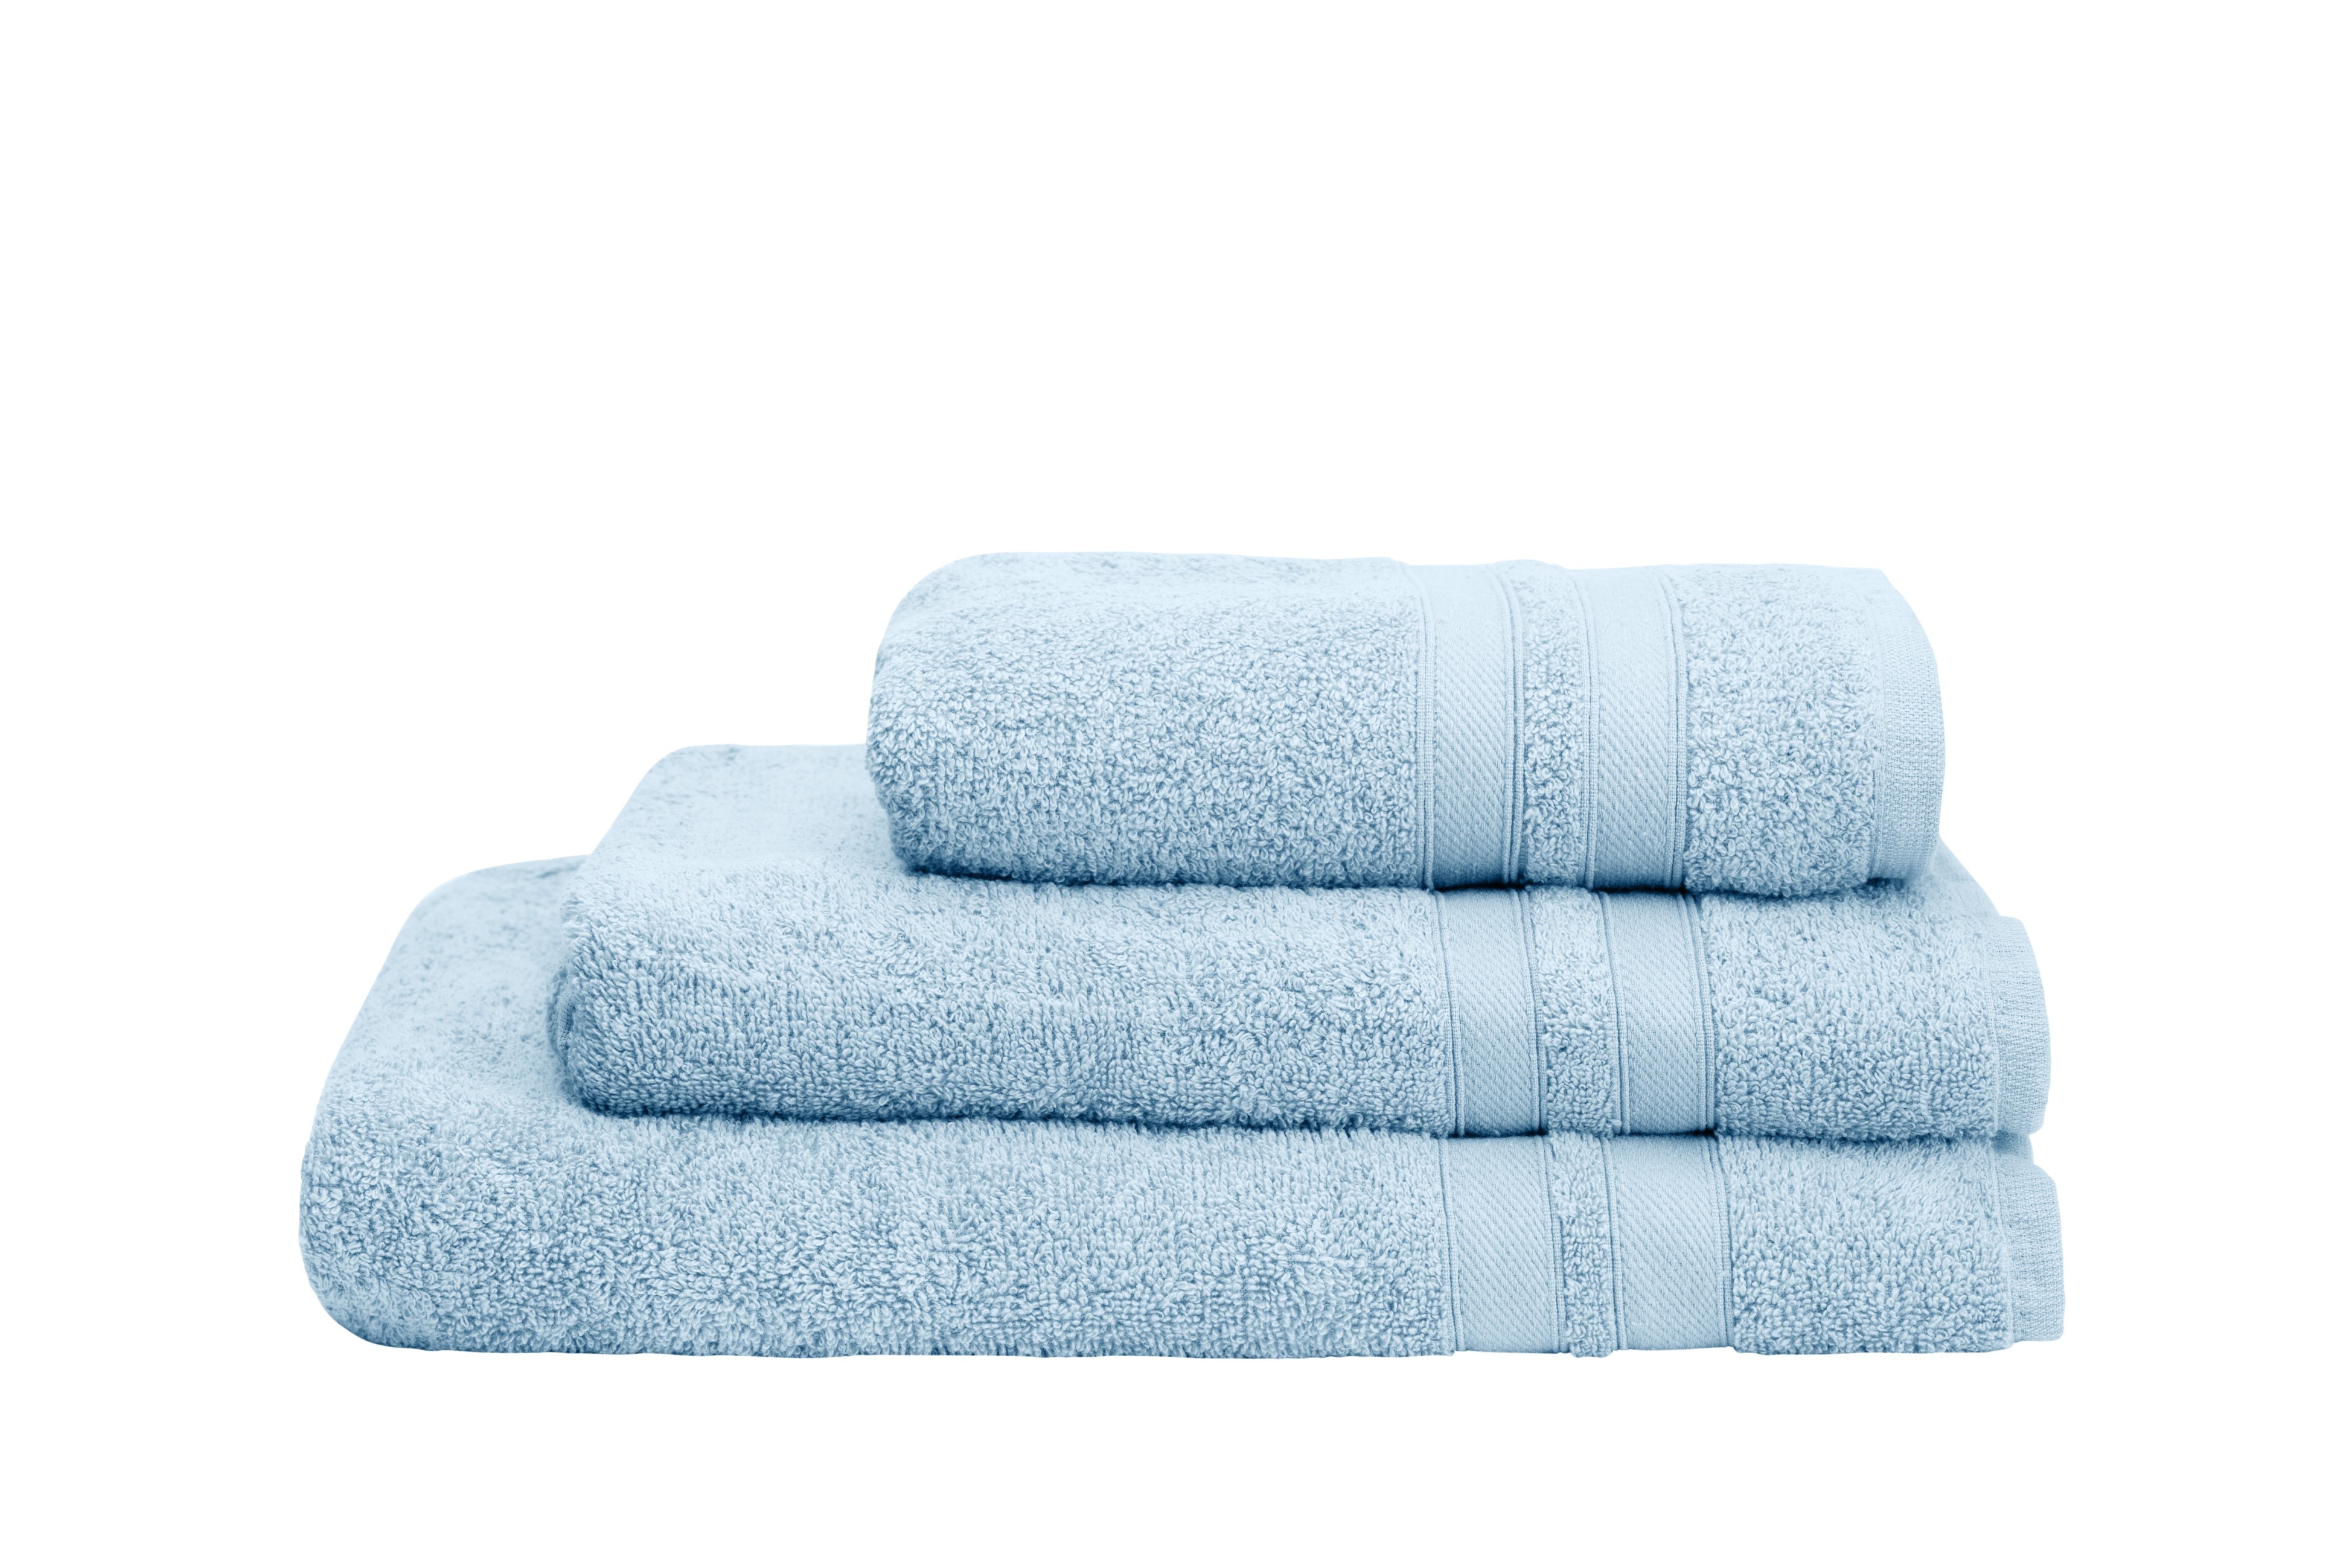 Bellissimo Lightweight & Quick Drying Turkish Cotton Towel Range (Colour & Size Options Available)